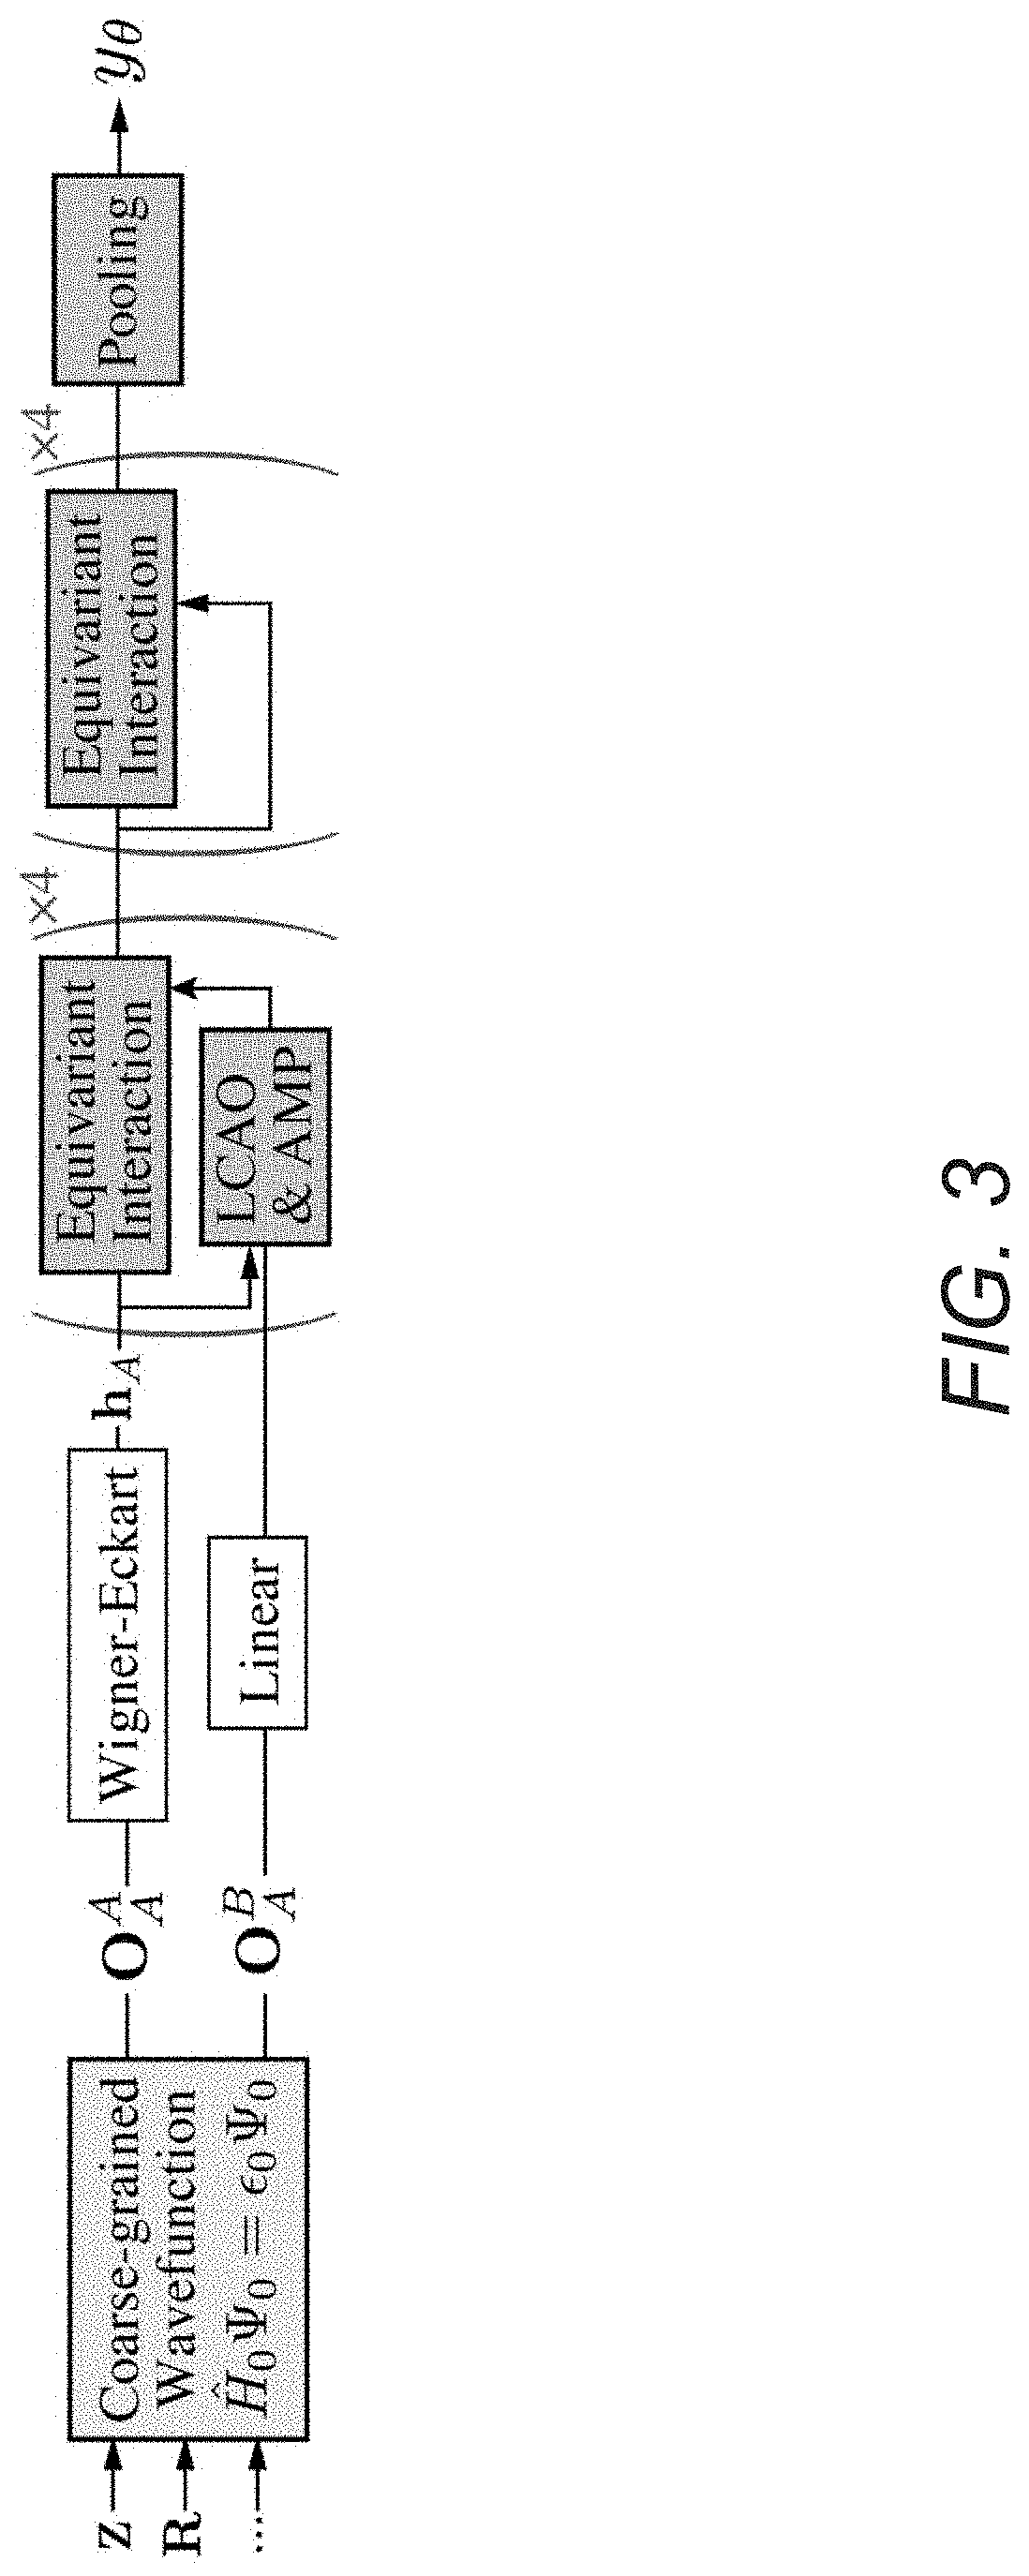 Systems and Methods for Determining Molecular Properties with Atomic-Orbital-Based Features